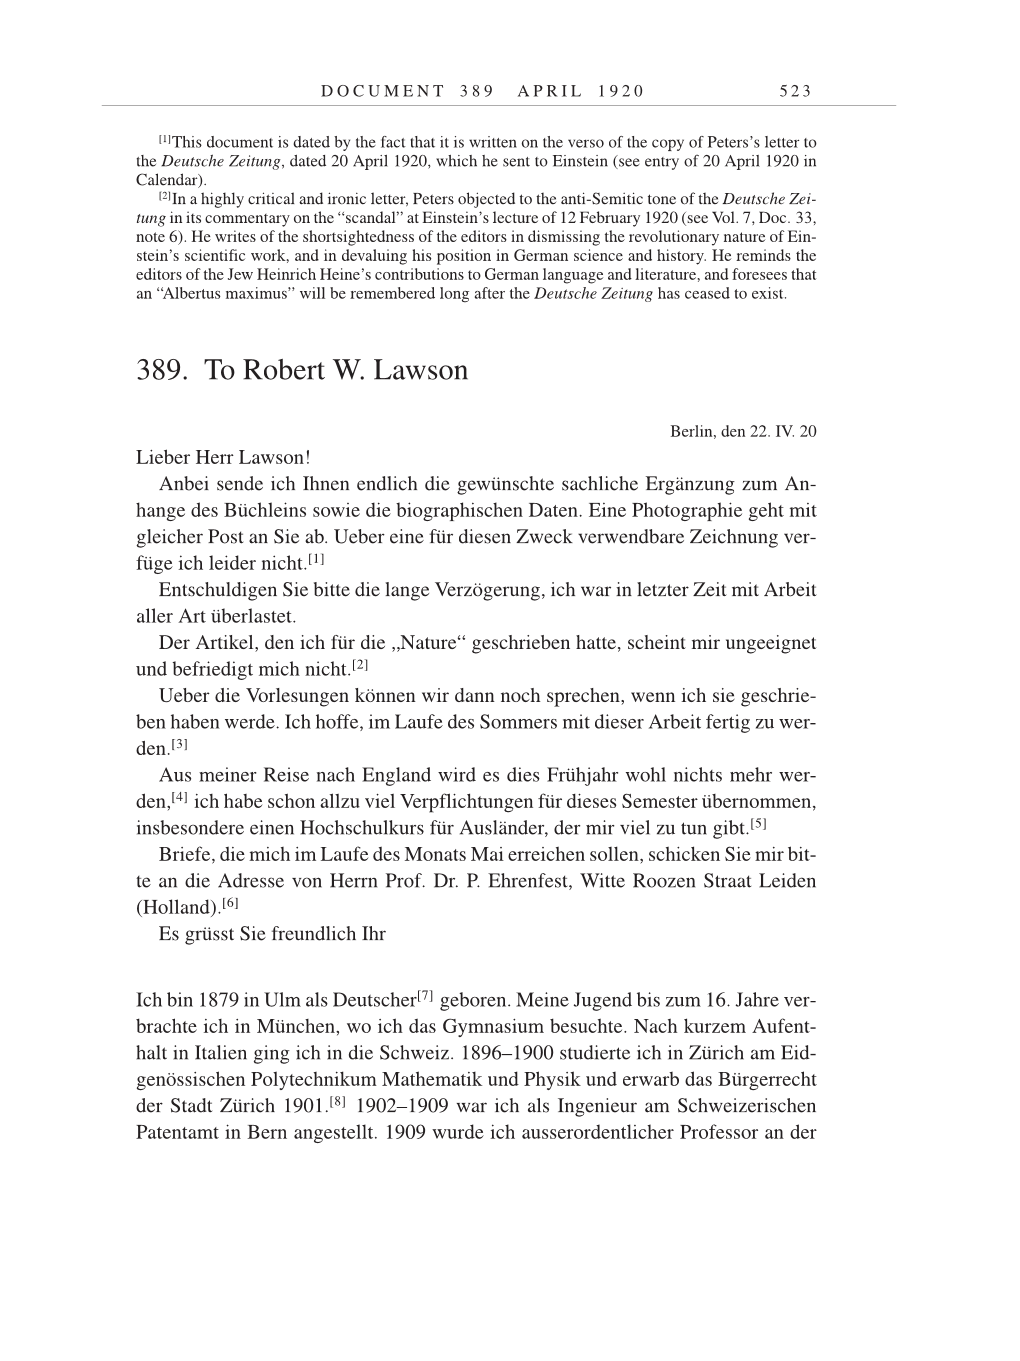 Volume 9: The Berlin Years: Correspondence January 1919-April 1920 page 523